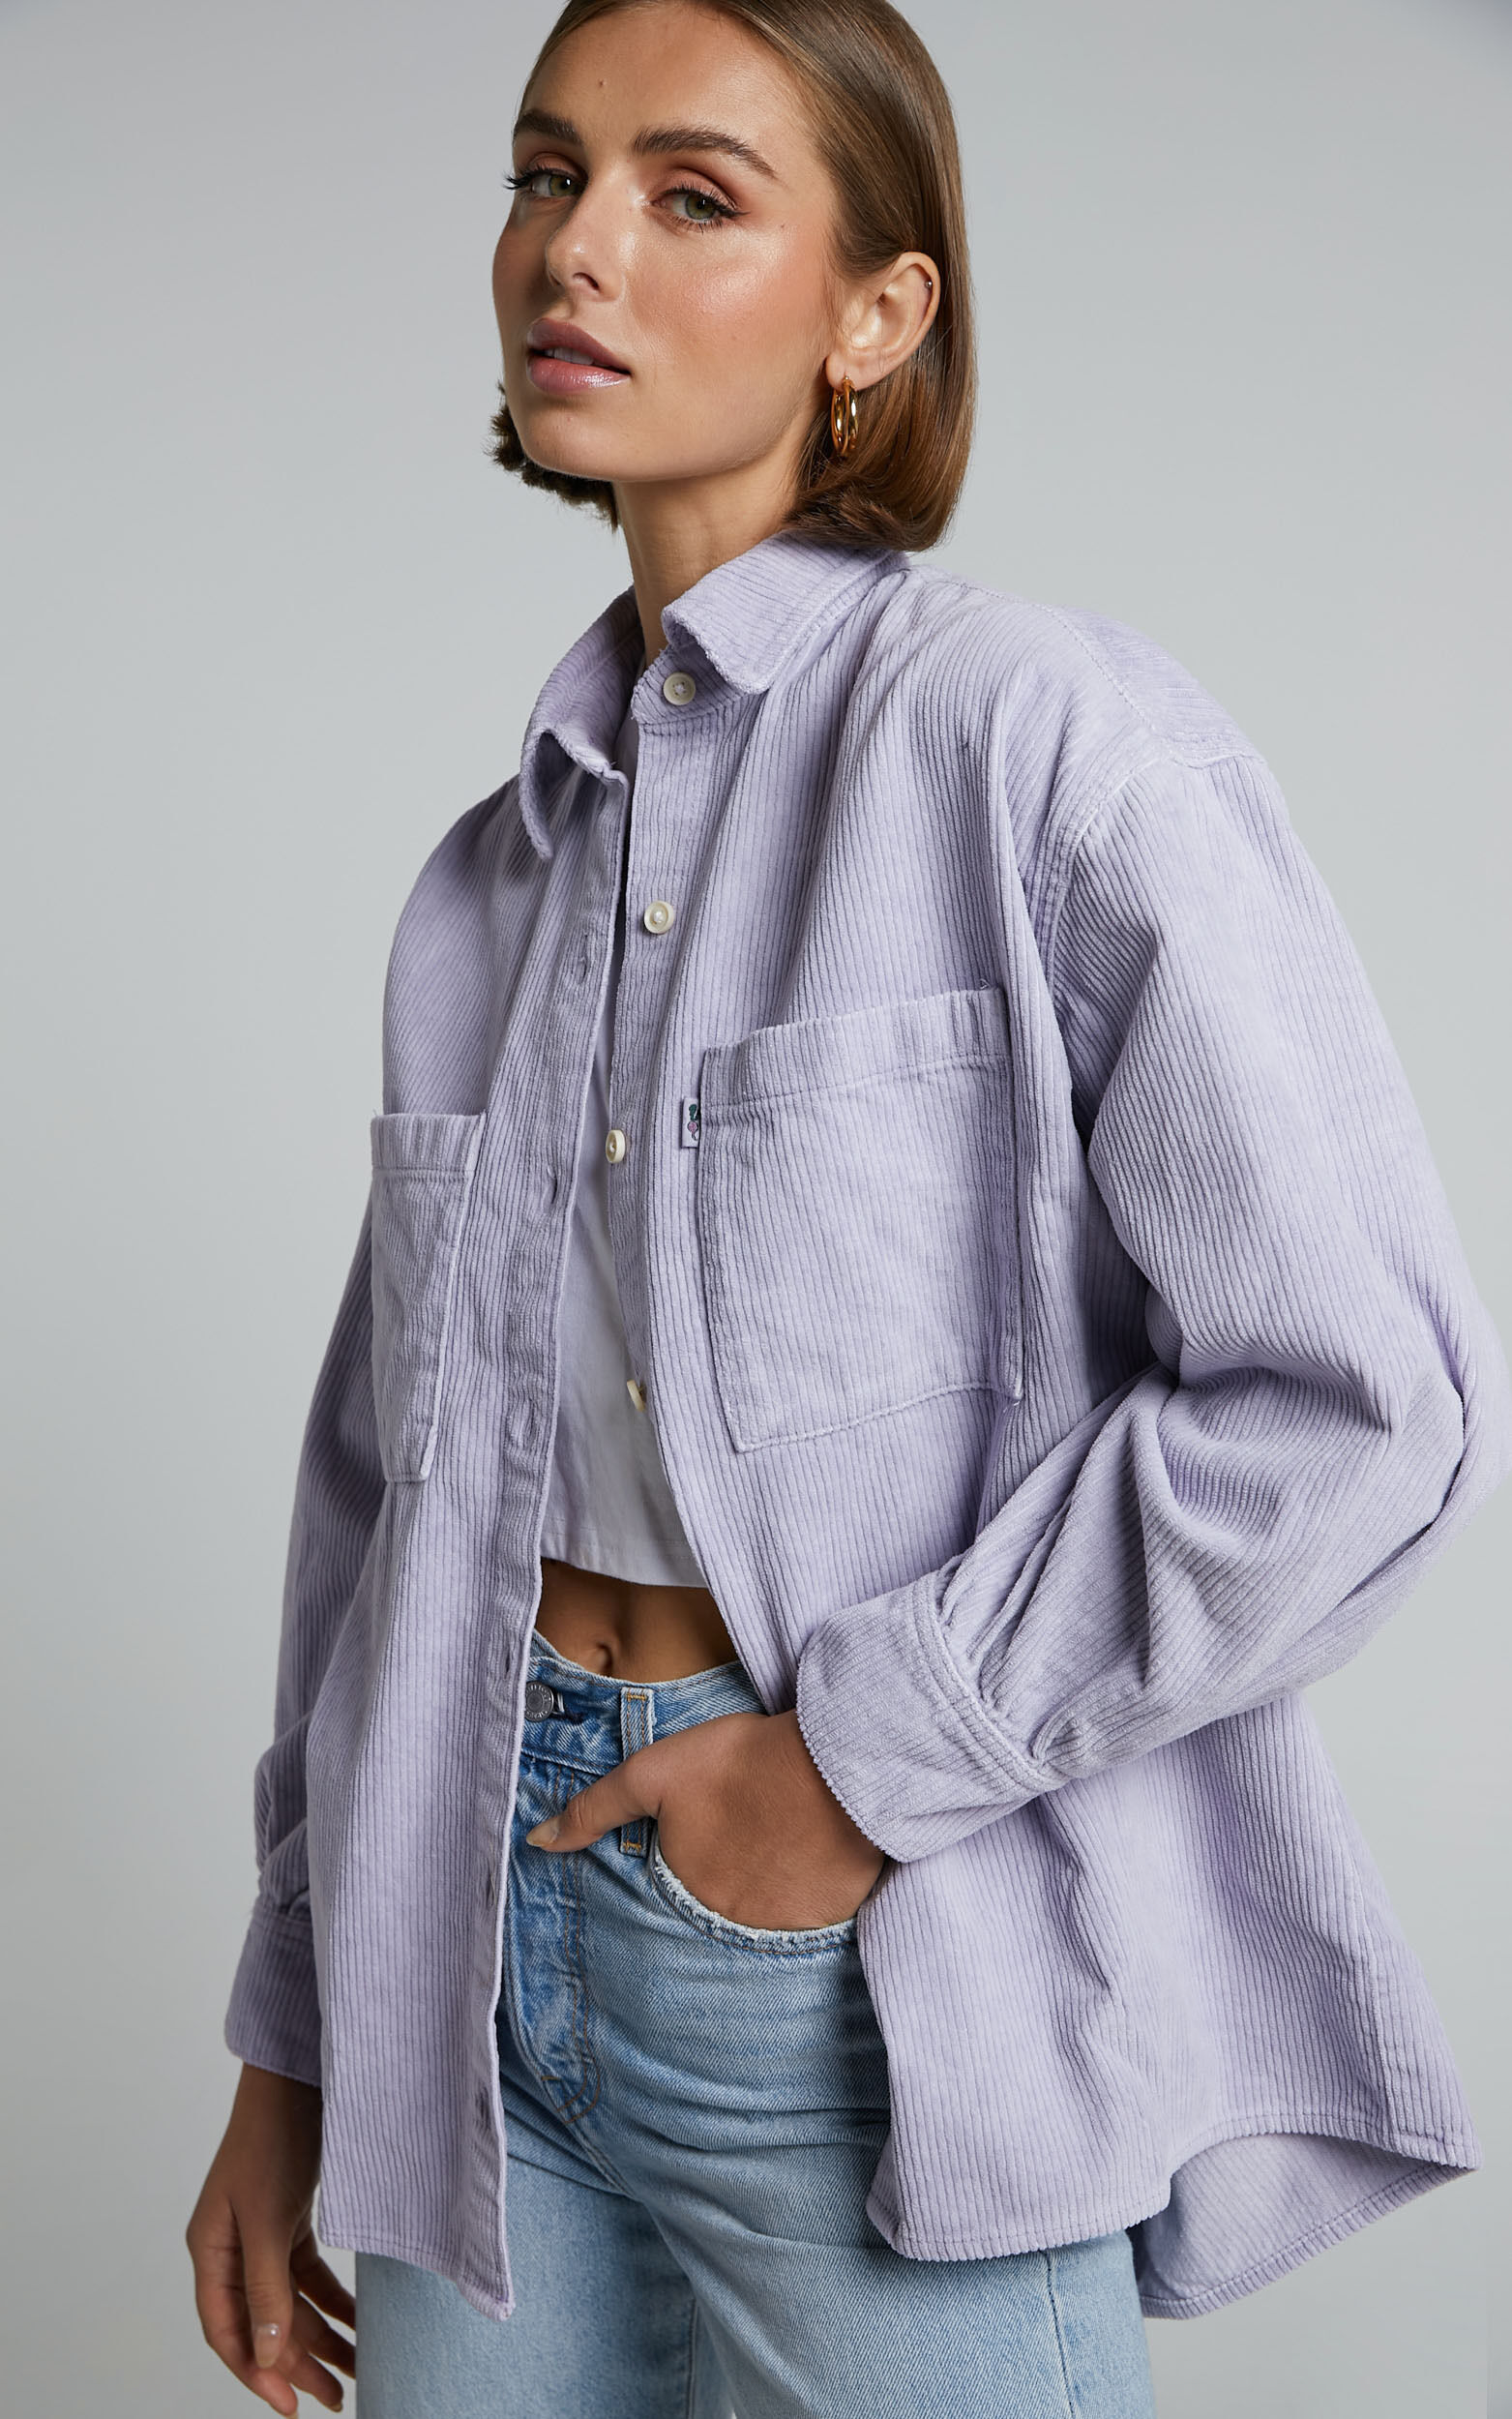 Levi's - Jovi Relaxed Shirt in PURPLE GARMENT DYE - L, PRP1, super-hi-res image number null